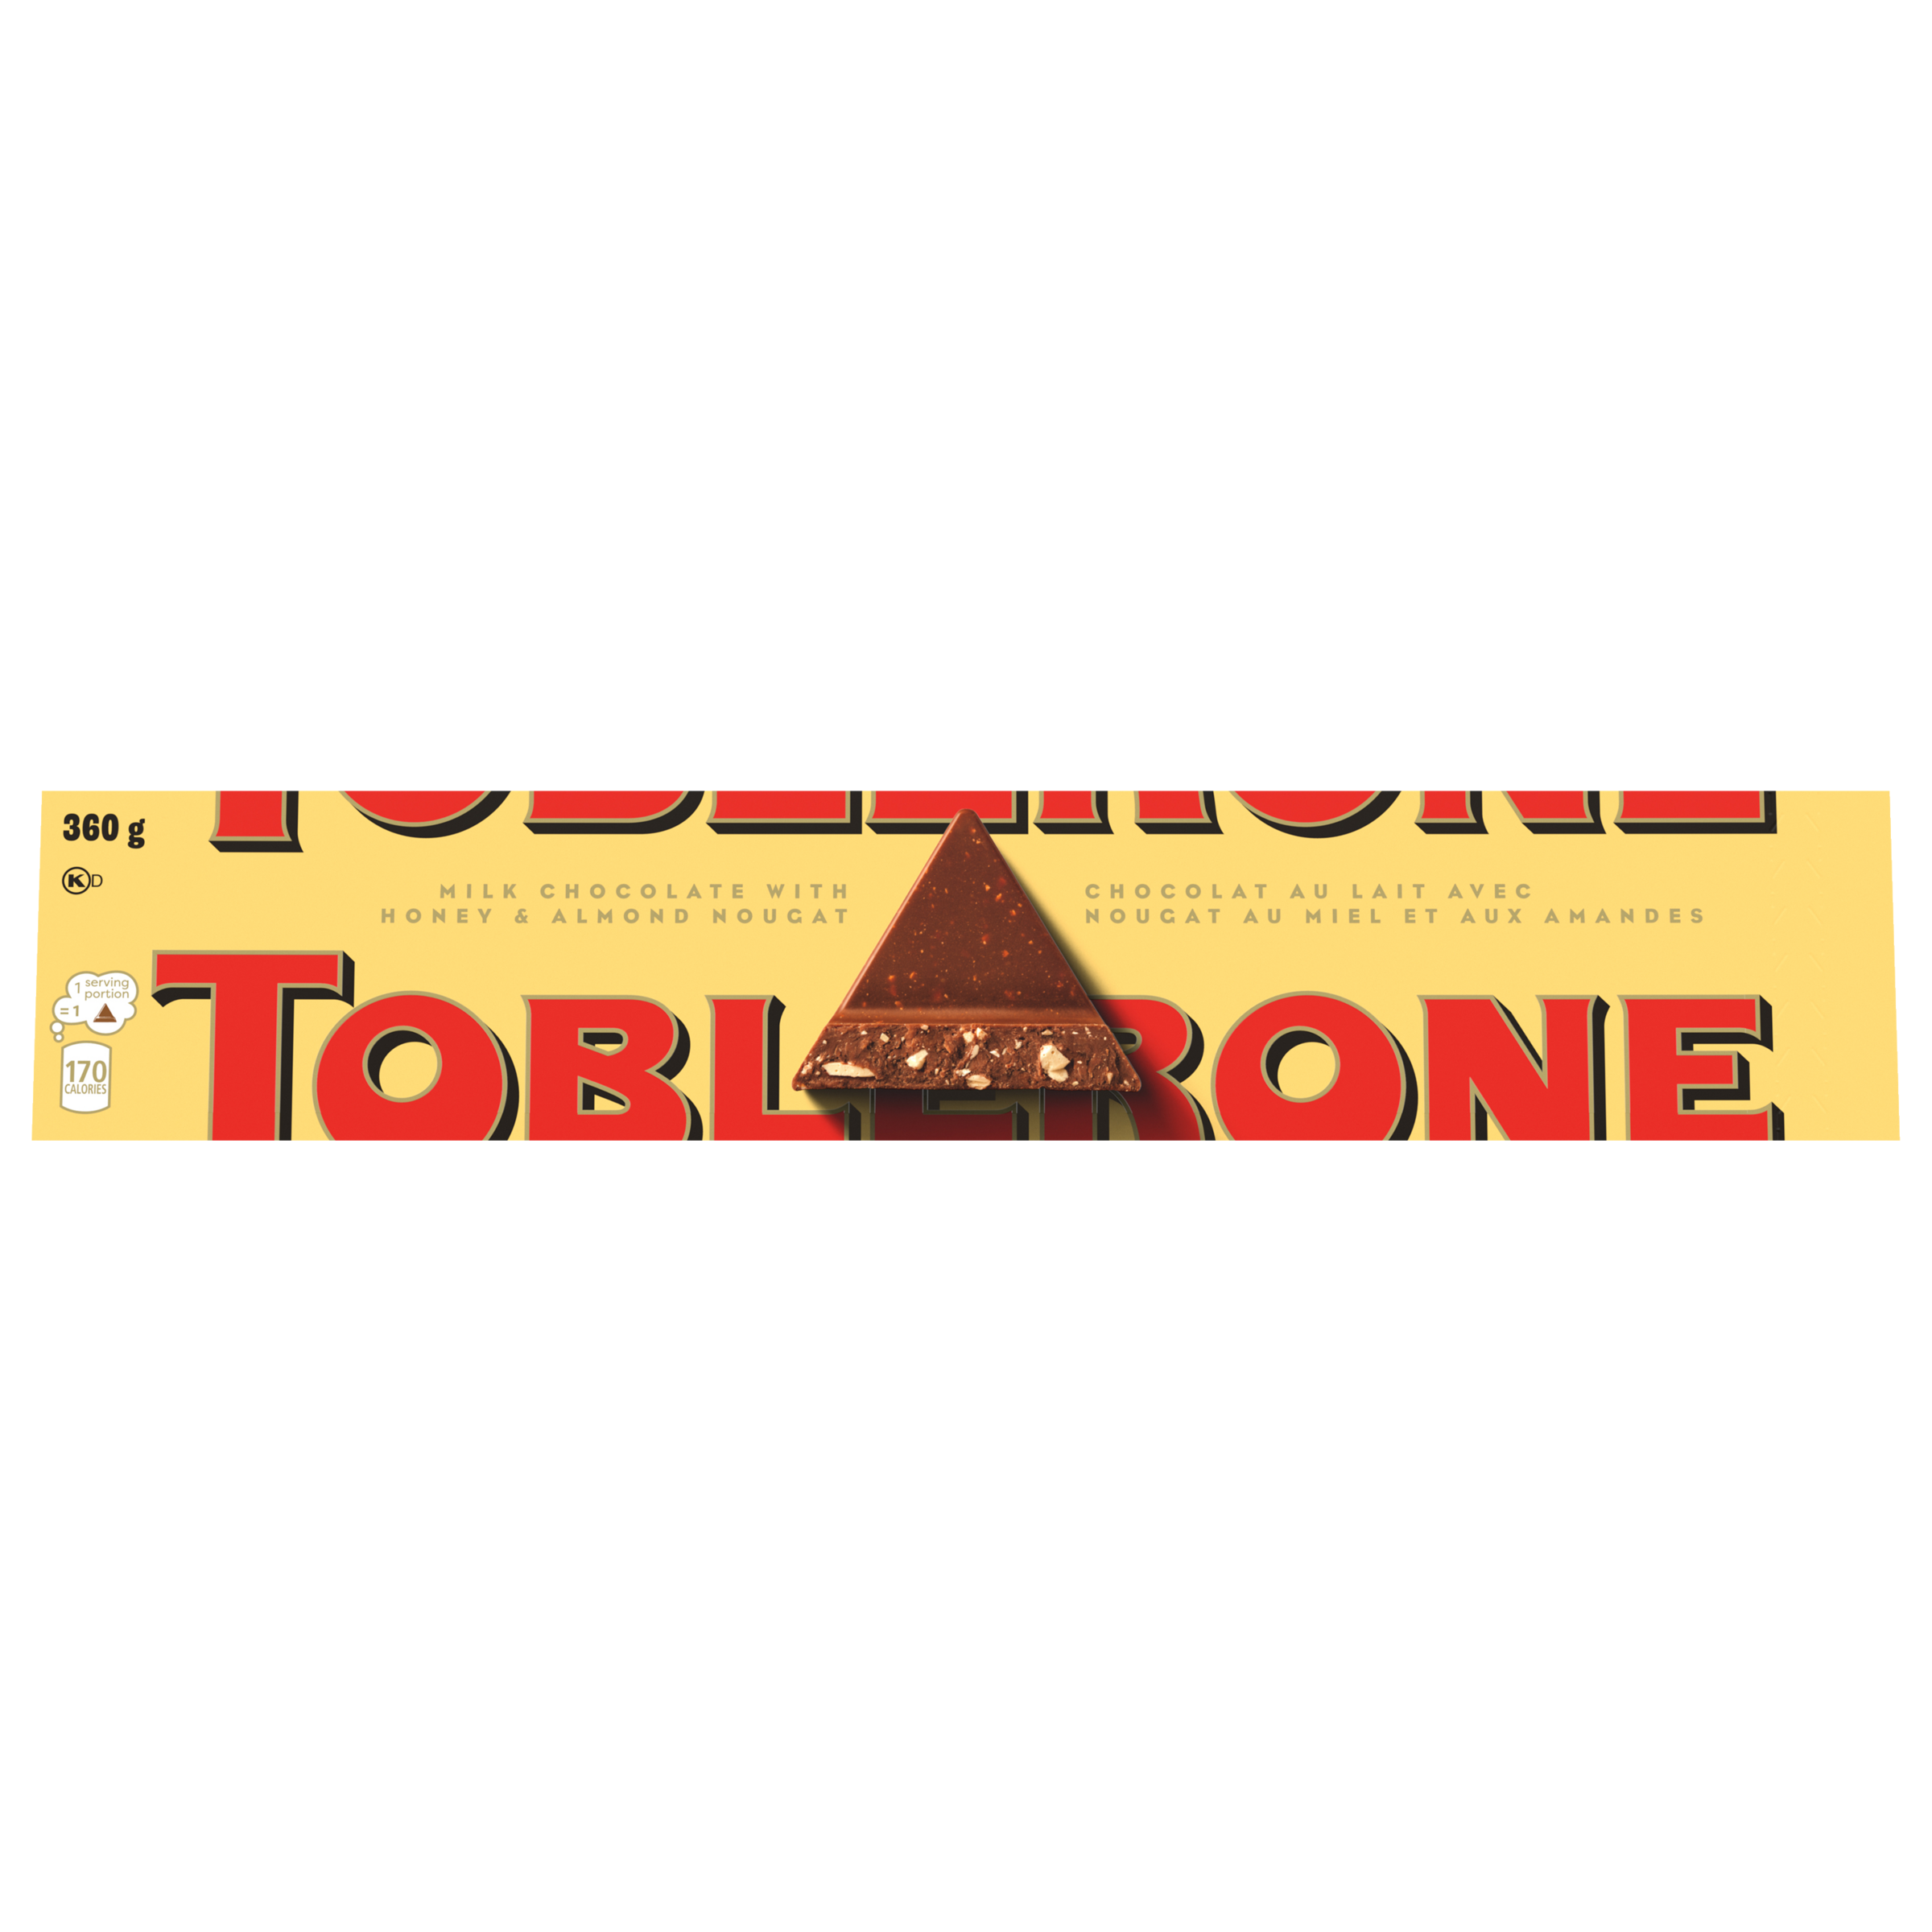 TOBLERONE Milk Chocolate with Honey and Almond Nougat Bar (360 g)-thumbnail-1